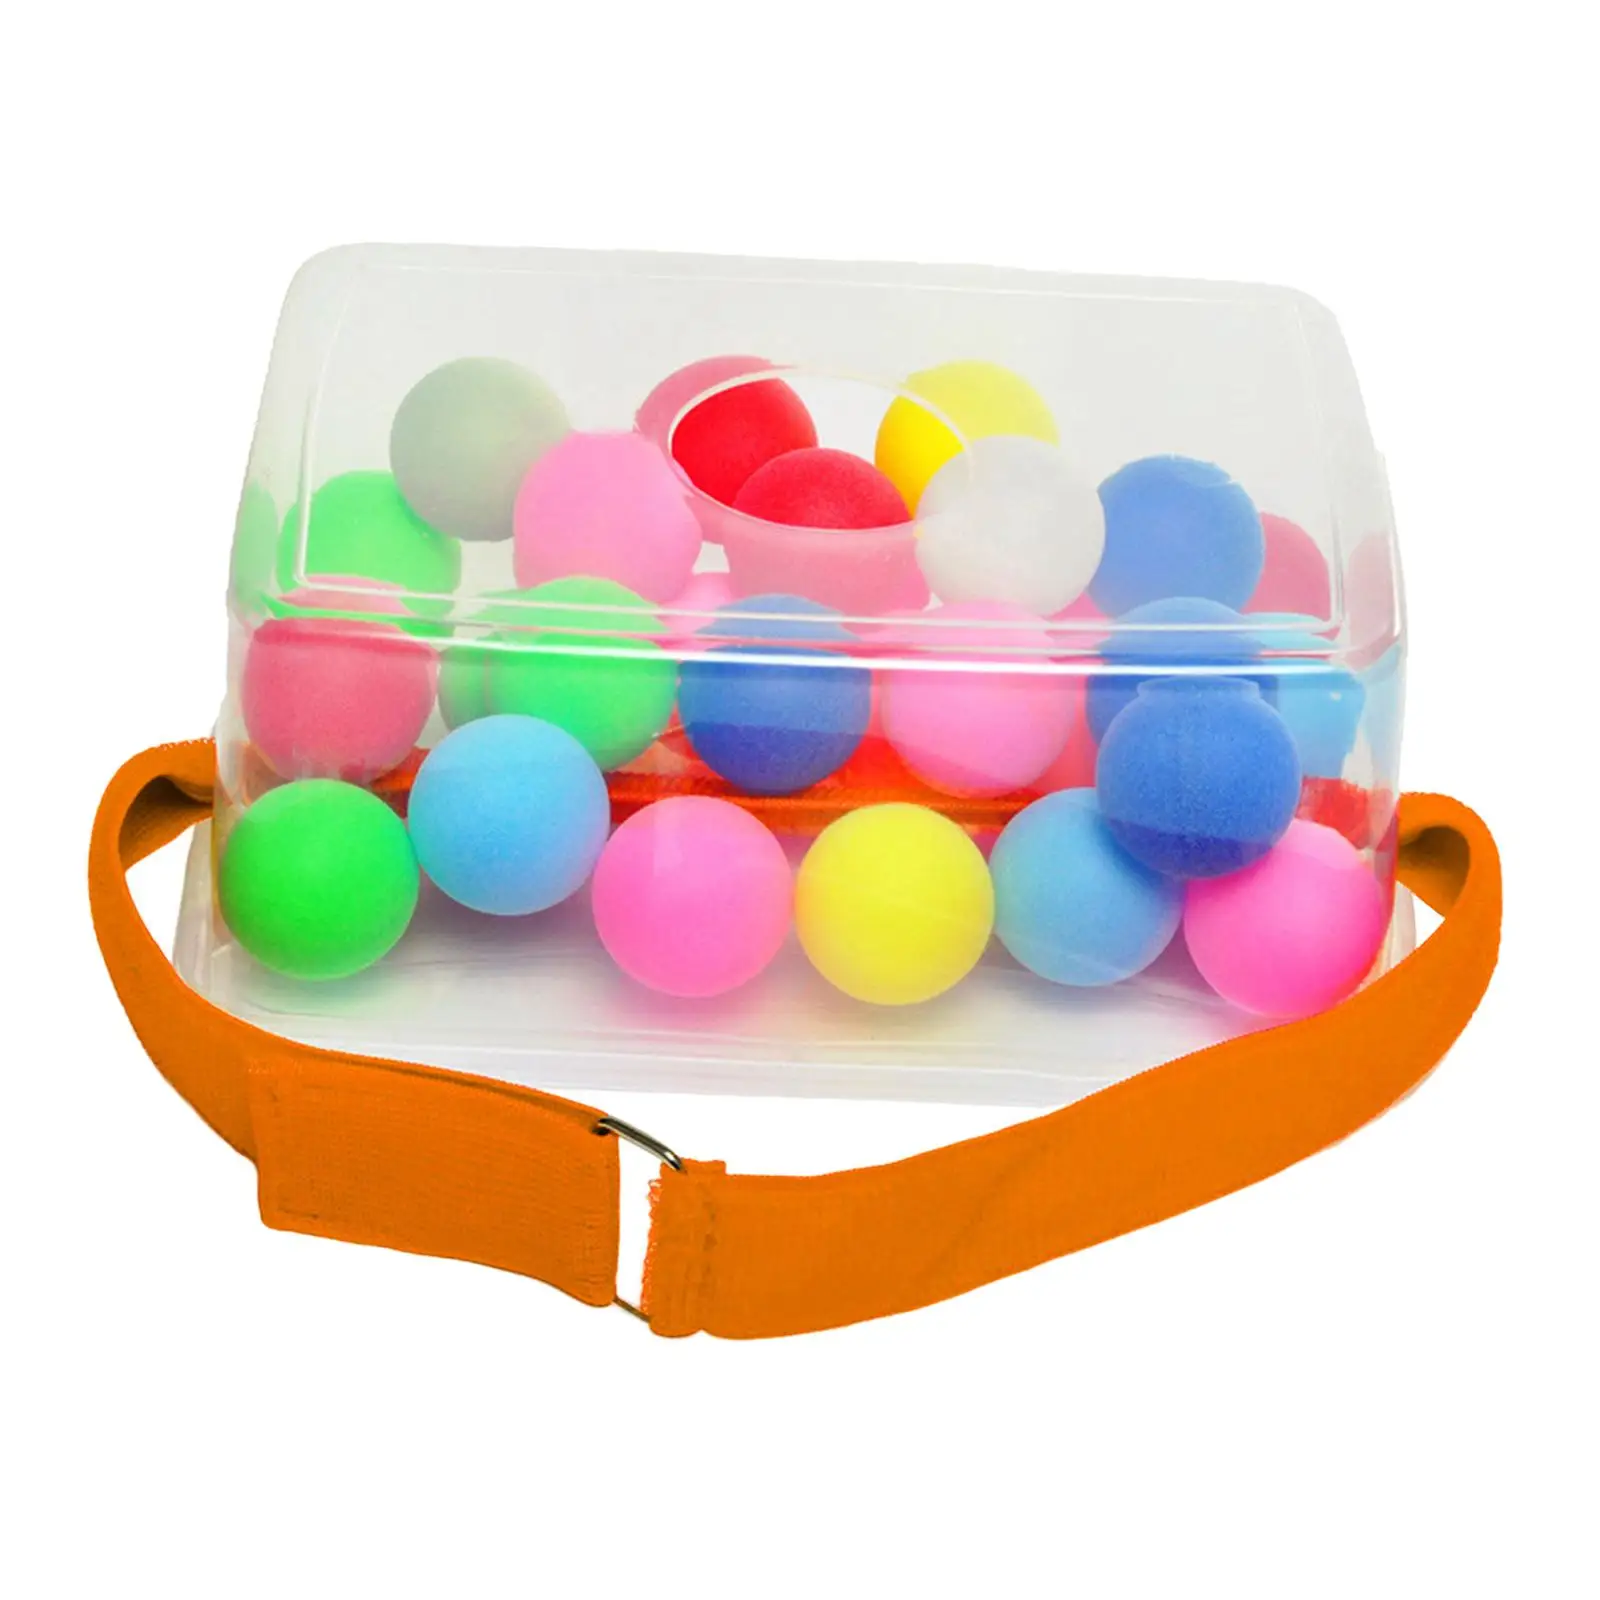 Shaking Swing Balls Game Fun Family Game Set for Beach Easter Party Playset